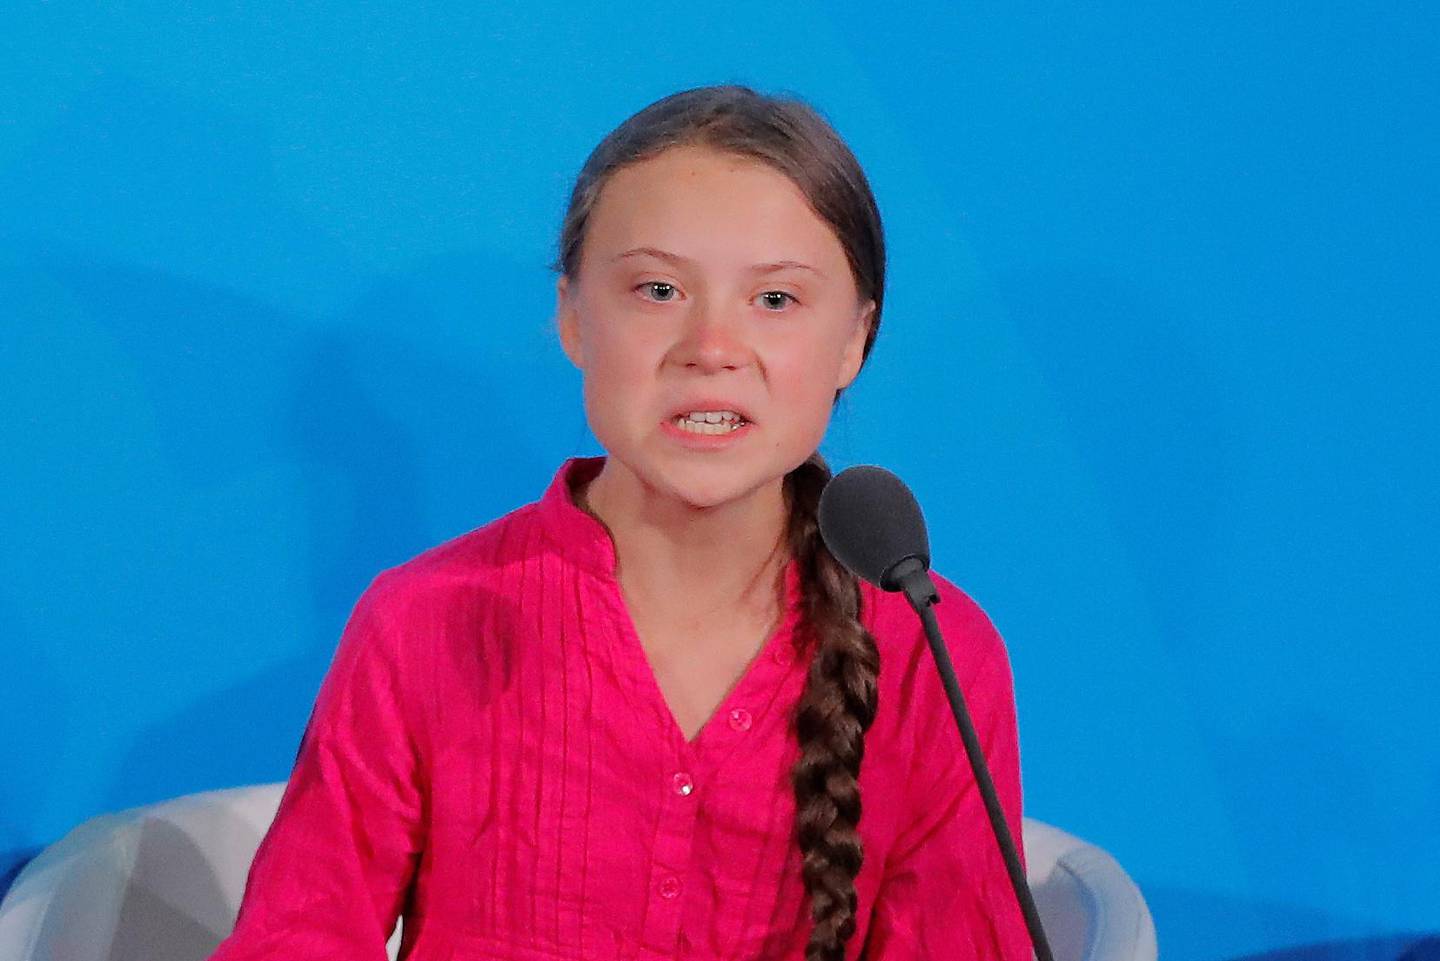 16-year-old Swedish climate activist Greta Thunberg speaks at the 2019 United Nations Climate Action Summit at U.N. headquarters in New York City, New York, U.S., September 23, 2019. REUTERS/Lucas Jackson